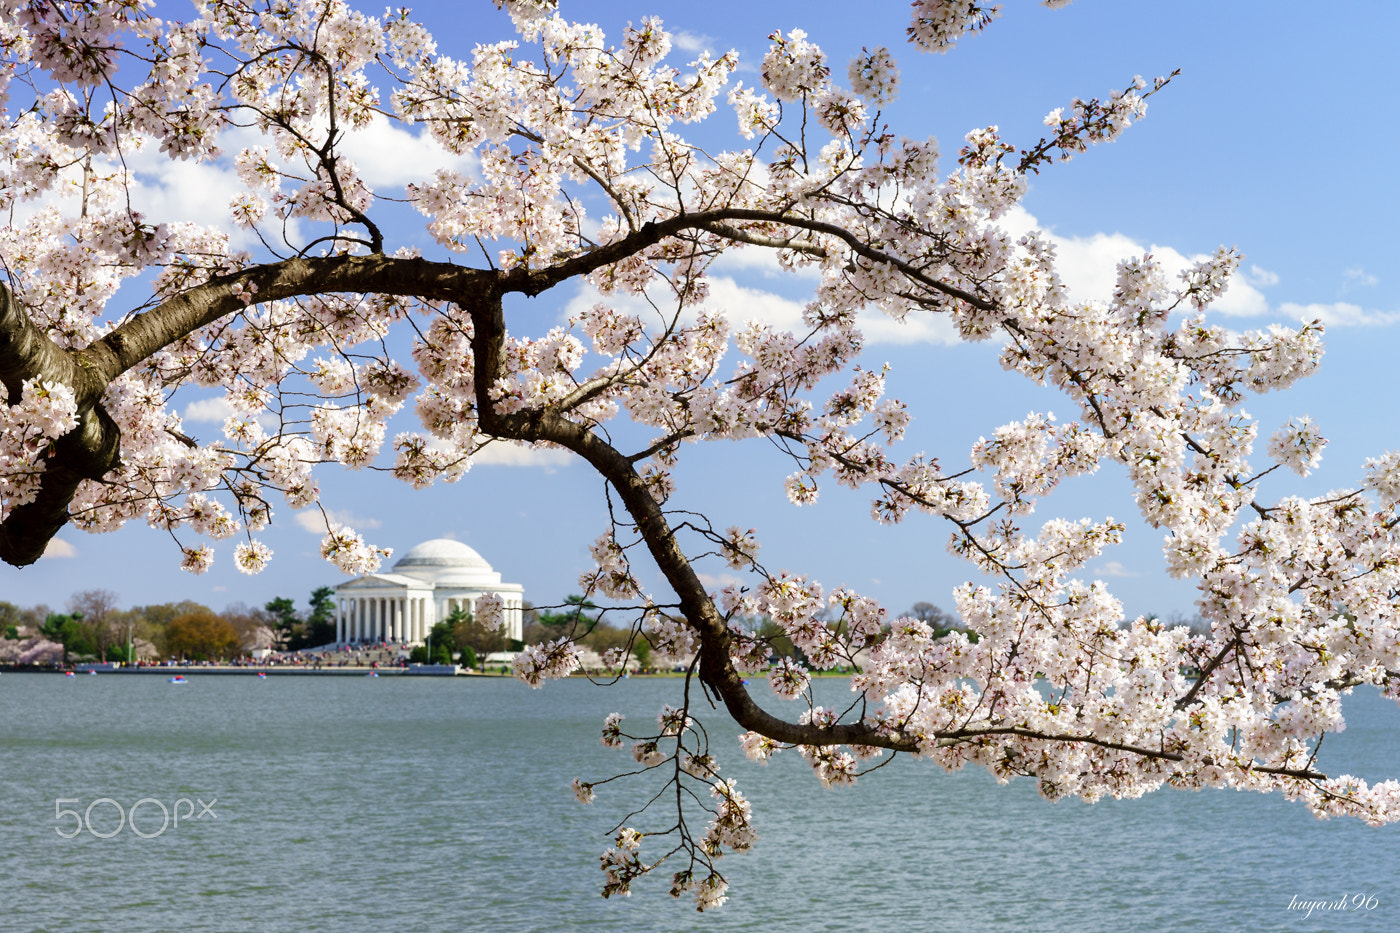 Hasselblad HV sample photo. Cherry blossom and jefferson memorial photography